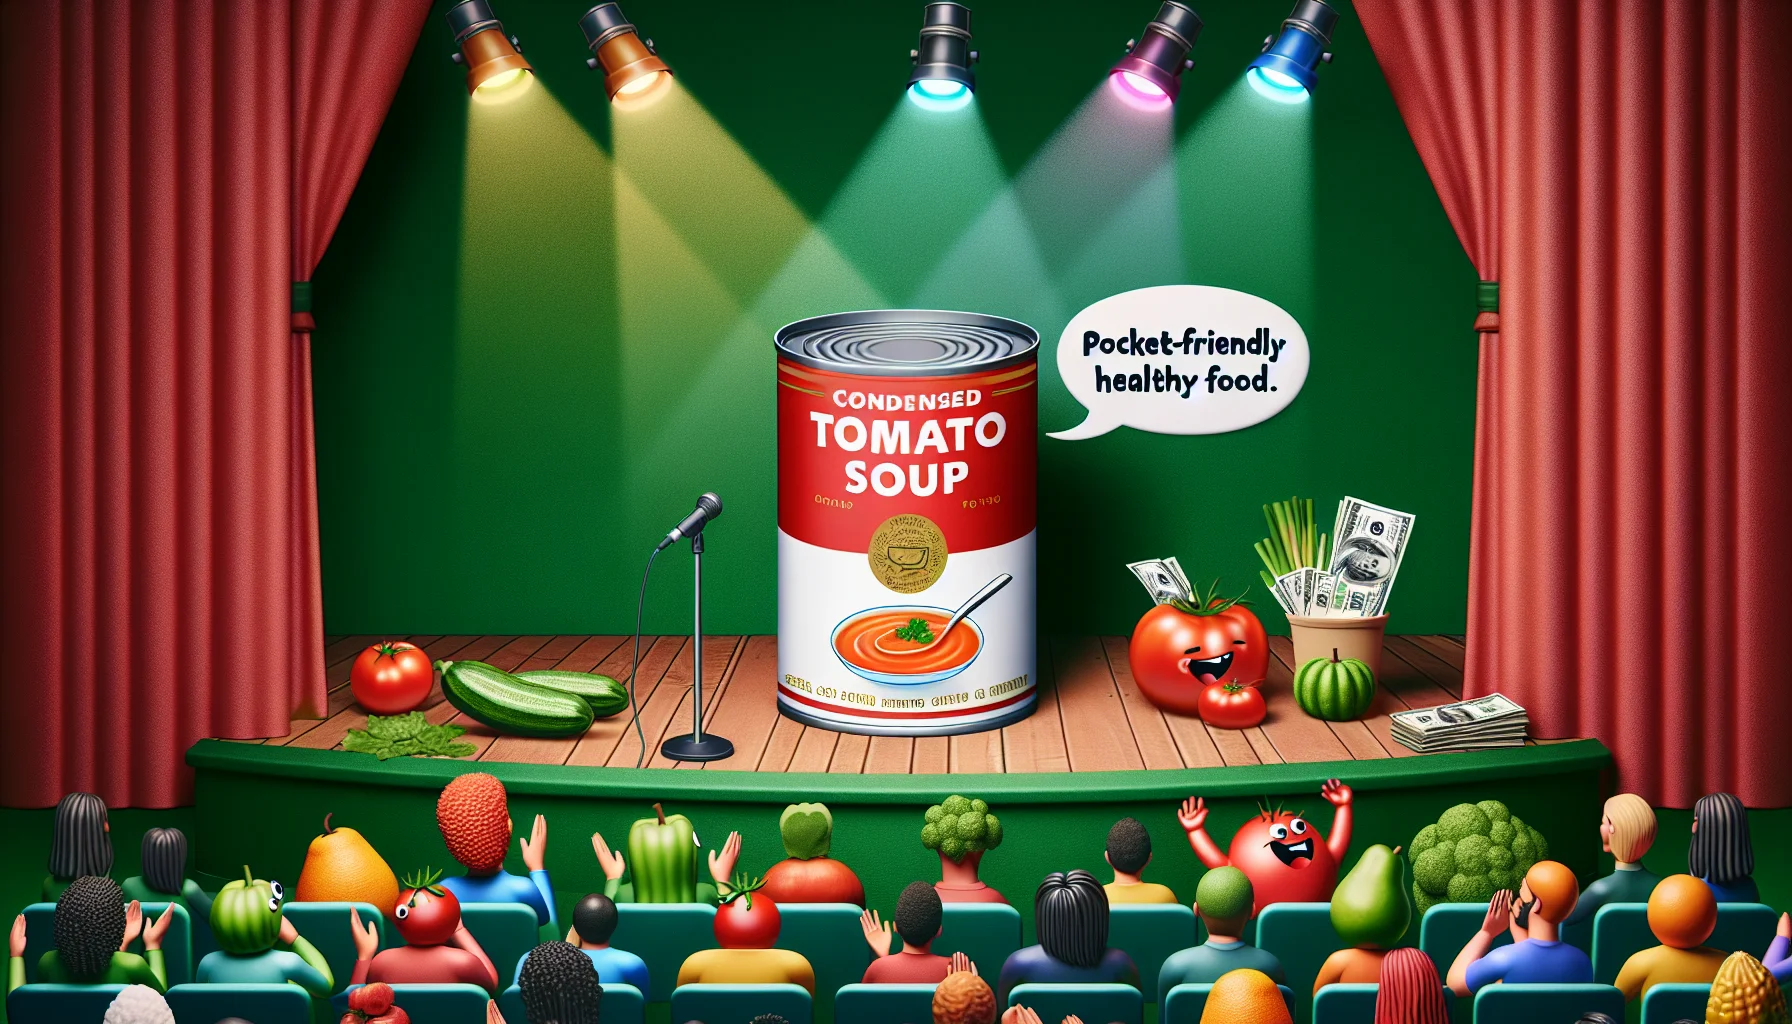 Imagine a humorous and enticing scenario showcasing a condensed tomato soup recipe. In your mind, imagine a brightly colored soup can wearing a sign that says 'Pocket-friendly Healthy Food'. This can of soup is standing on a comedy stage under a spotlight, delivering punchlines related to health and economizing, while the audience is made up of various fruits, vegetables, and money notes laughing and clapping. They're in a green backdrop with colorful spotlights illuminating the stage.